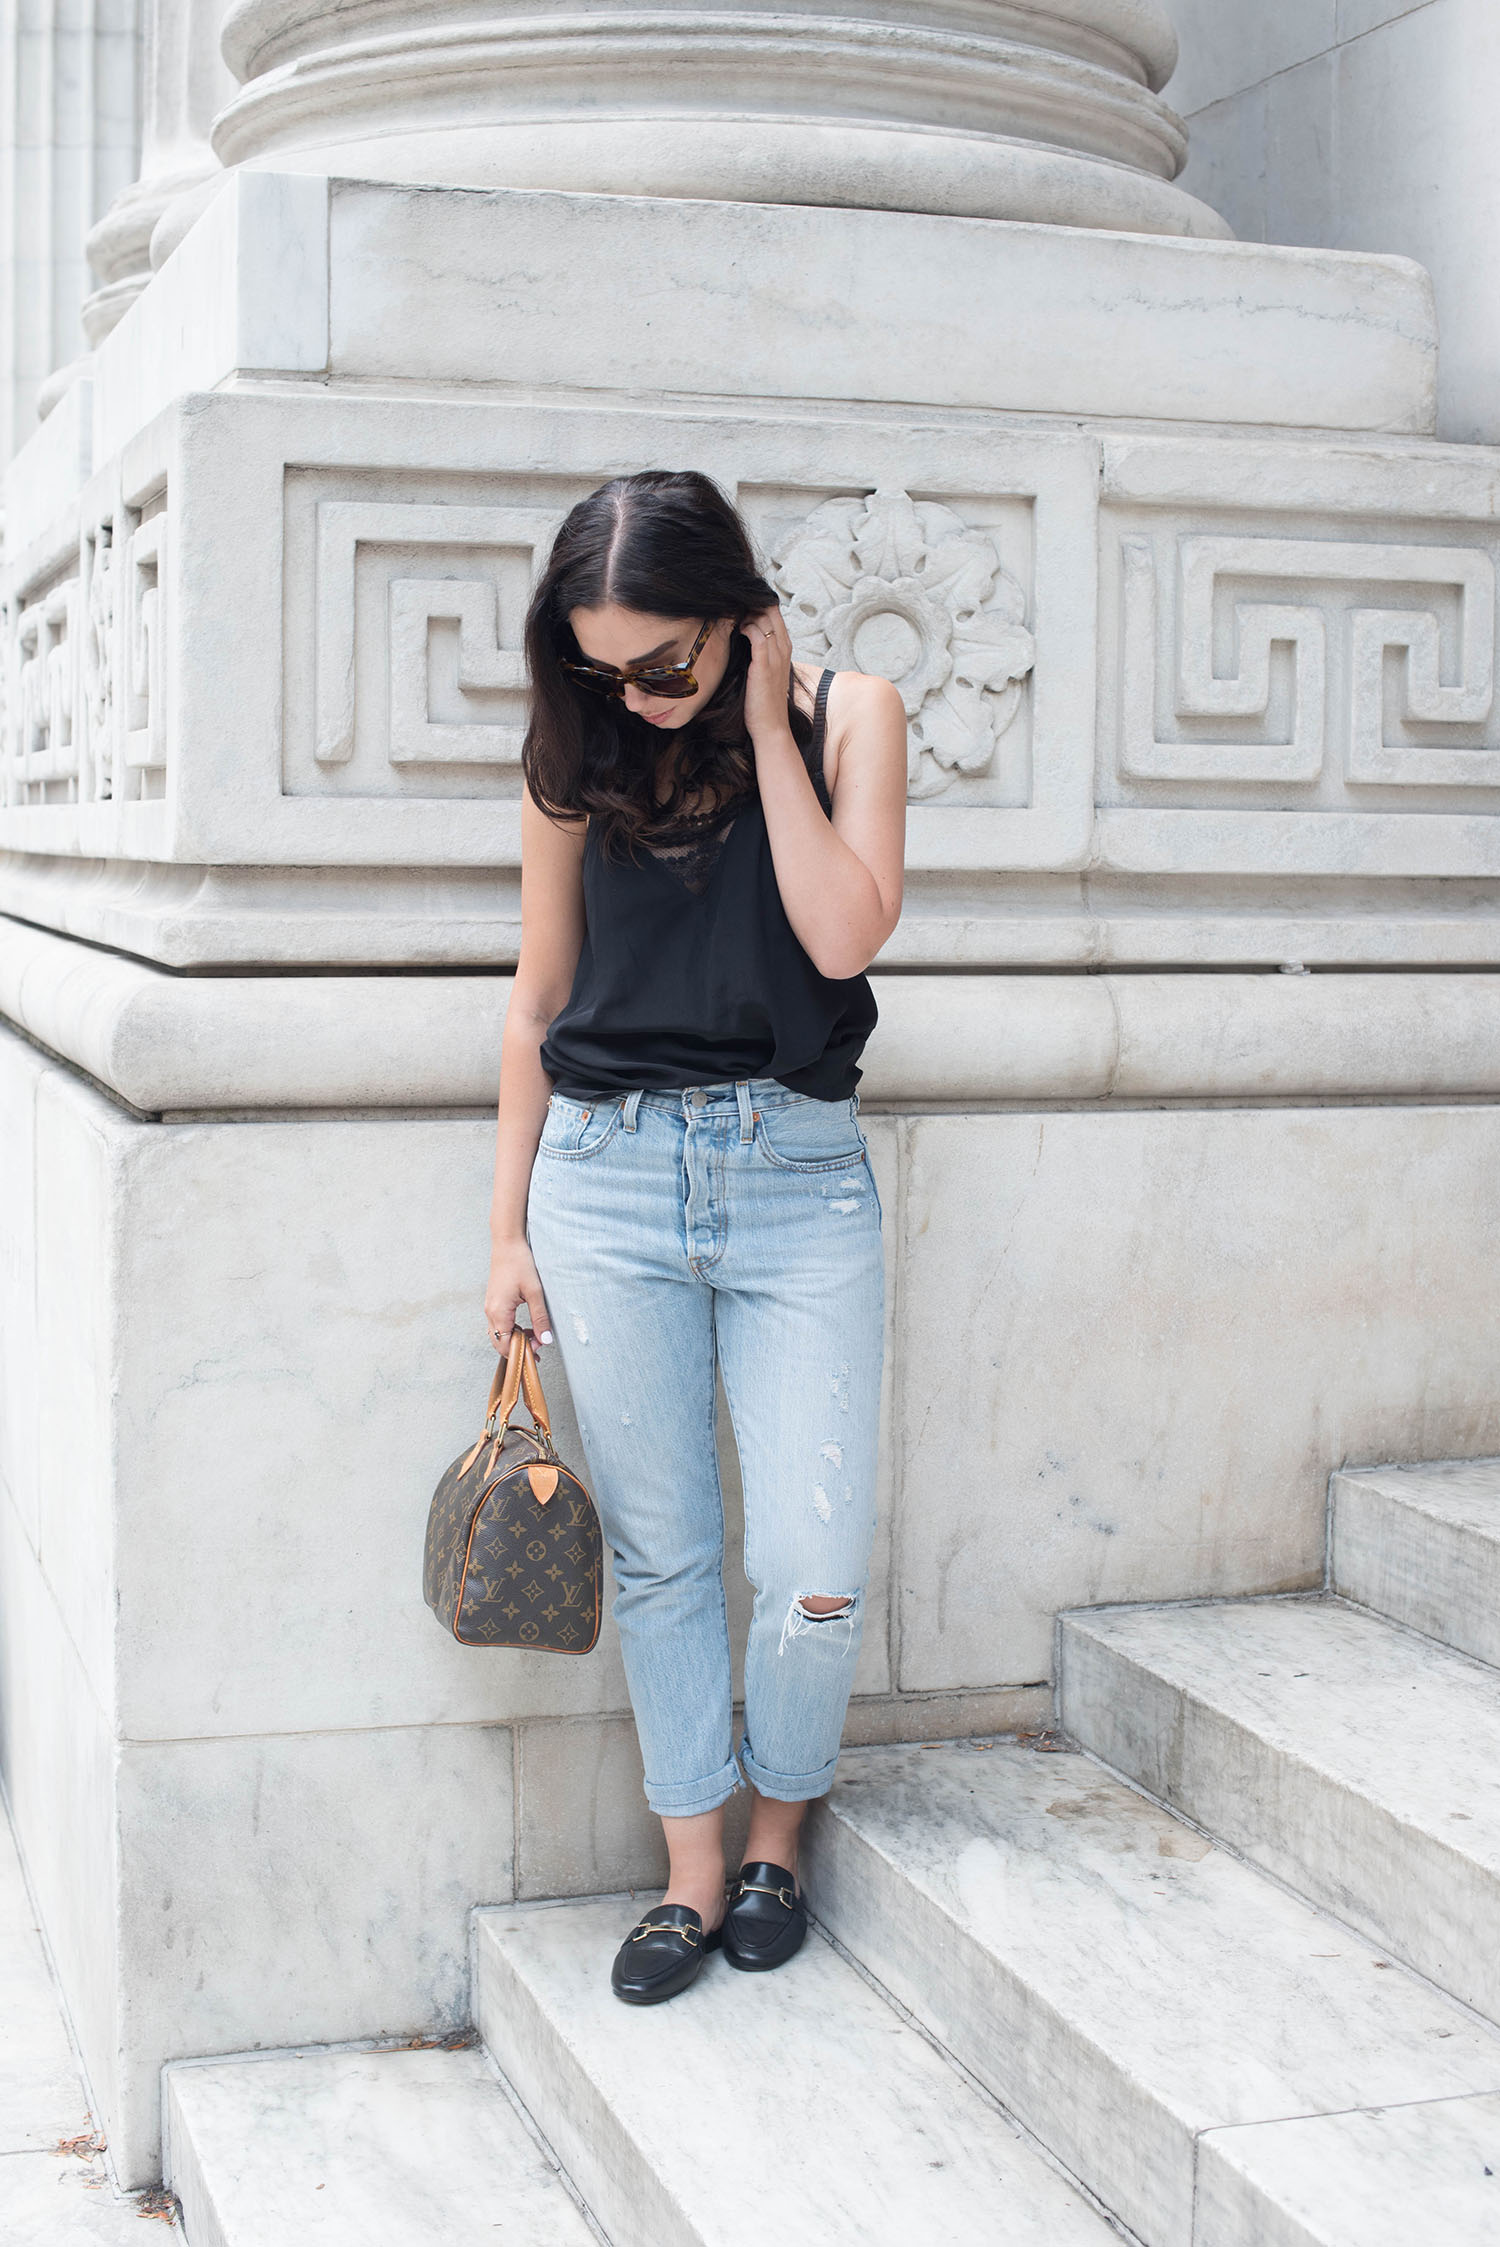 Winnipeg fashion blogger Cee Fardoe of Coco & Vera stands on the stairs of the Carnegie Library in Manhattan, wearing Levi's jeans and carrying a Louis Vuitton Speedy 25